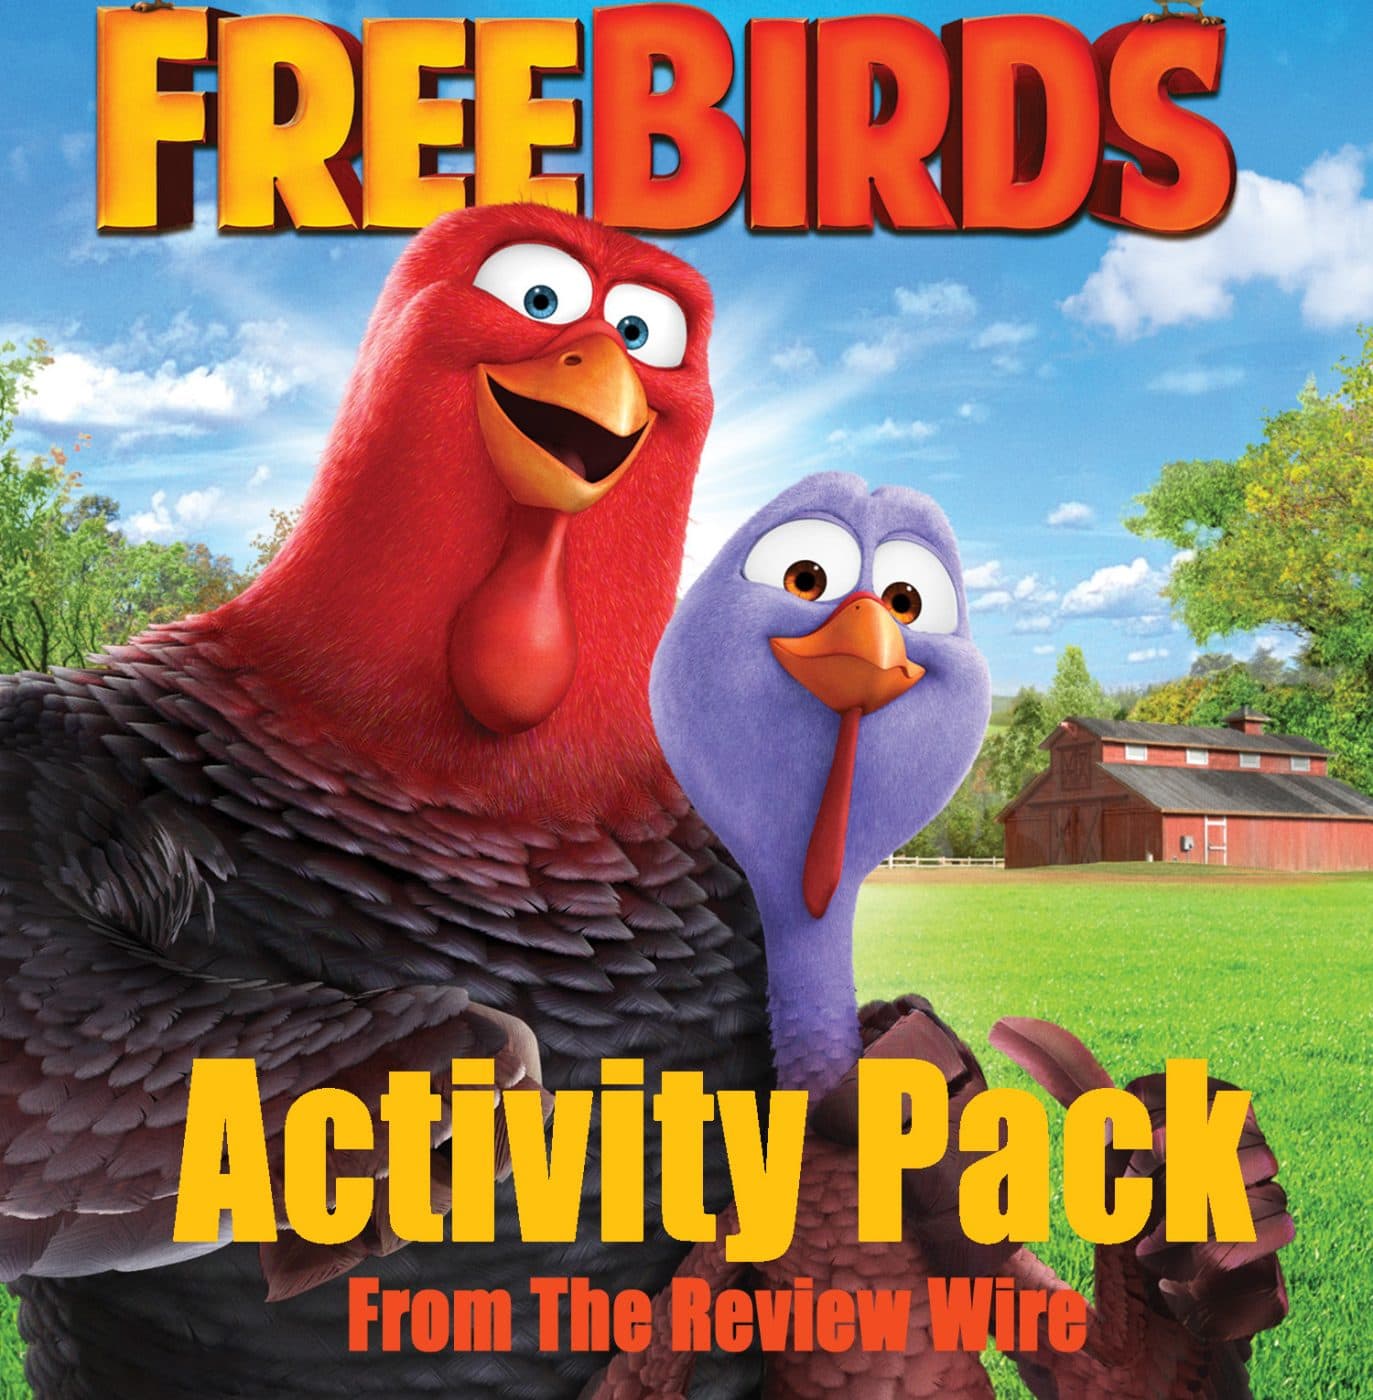 Free Birds Movie Printable Activity Packet + 10 Things You Probably ...